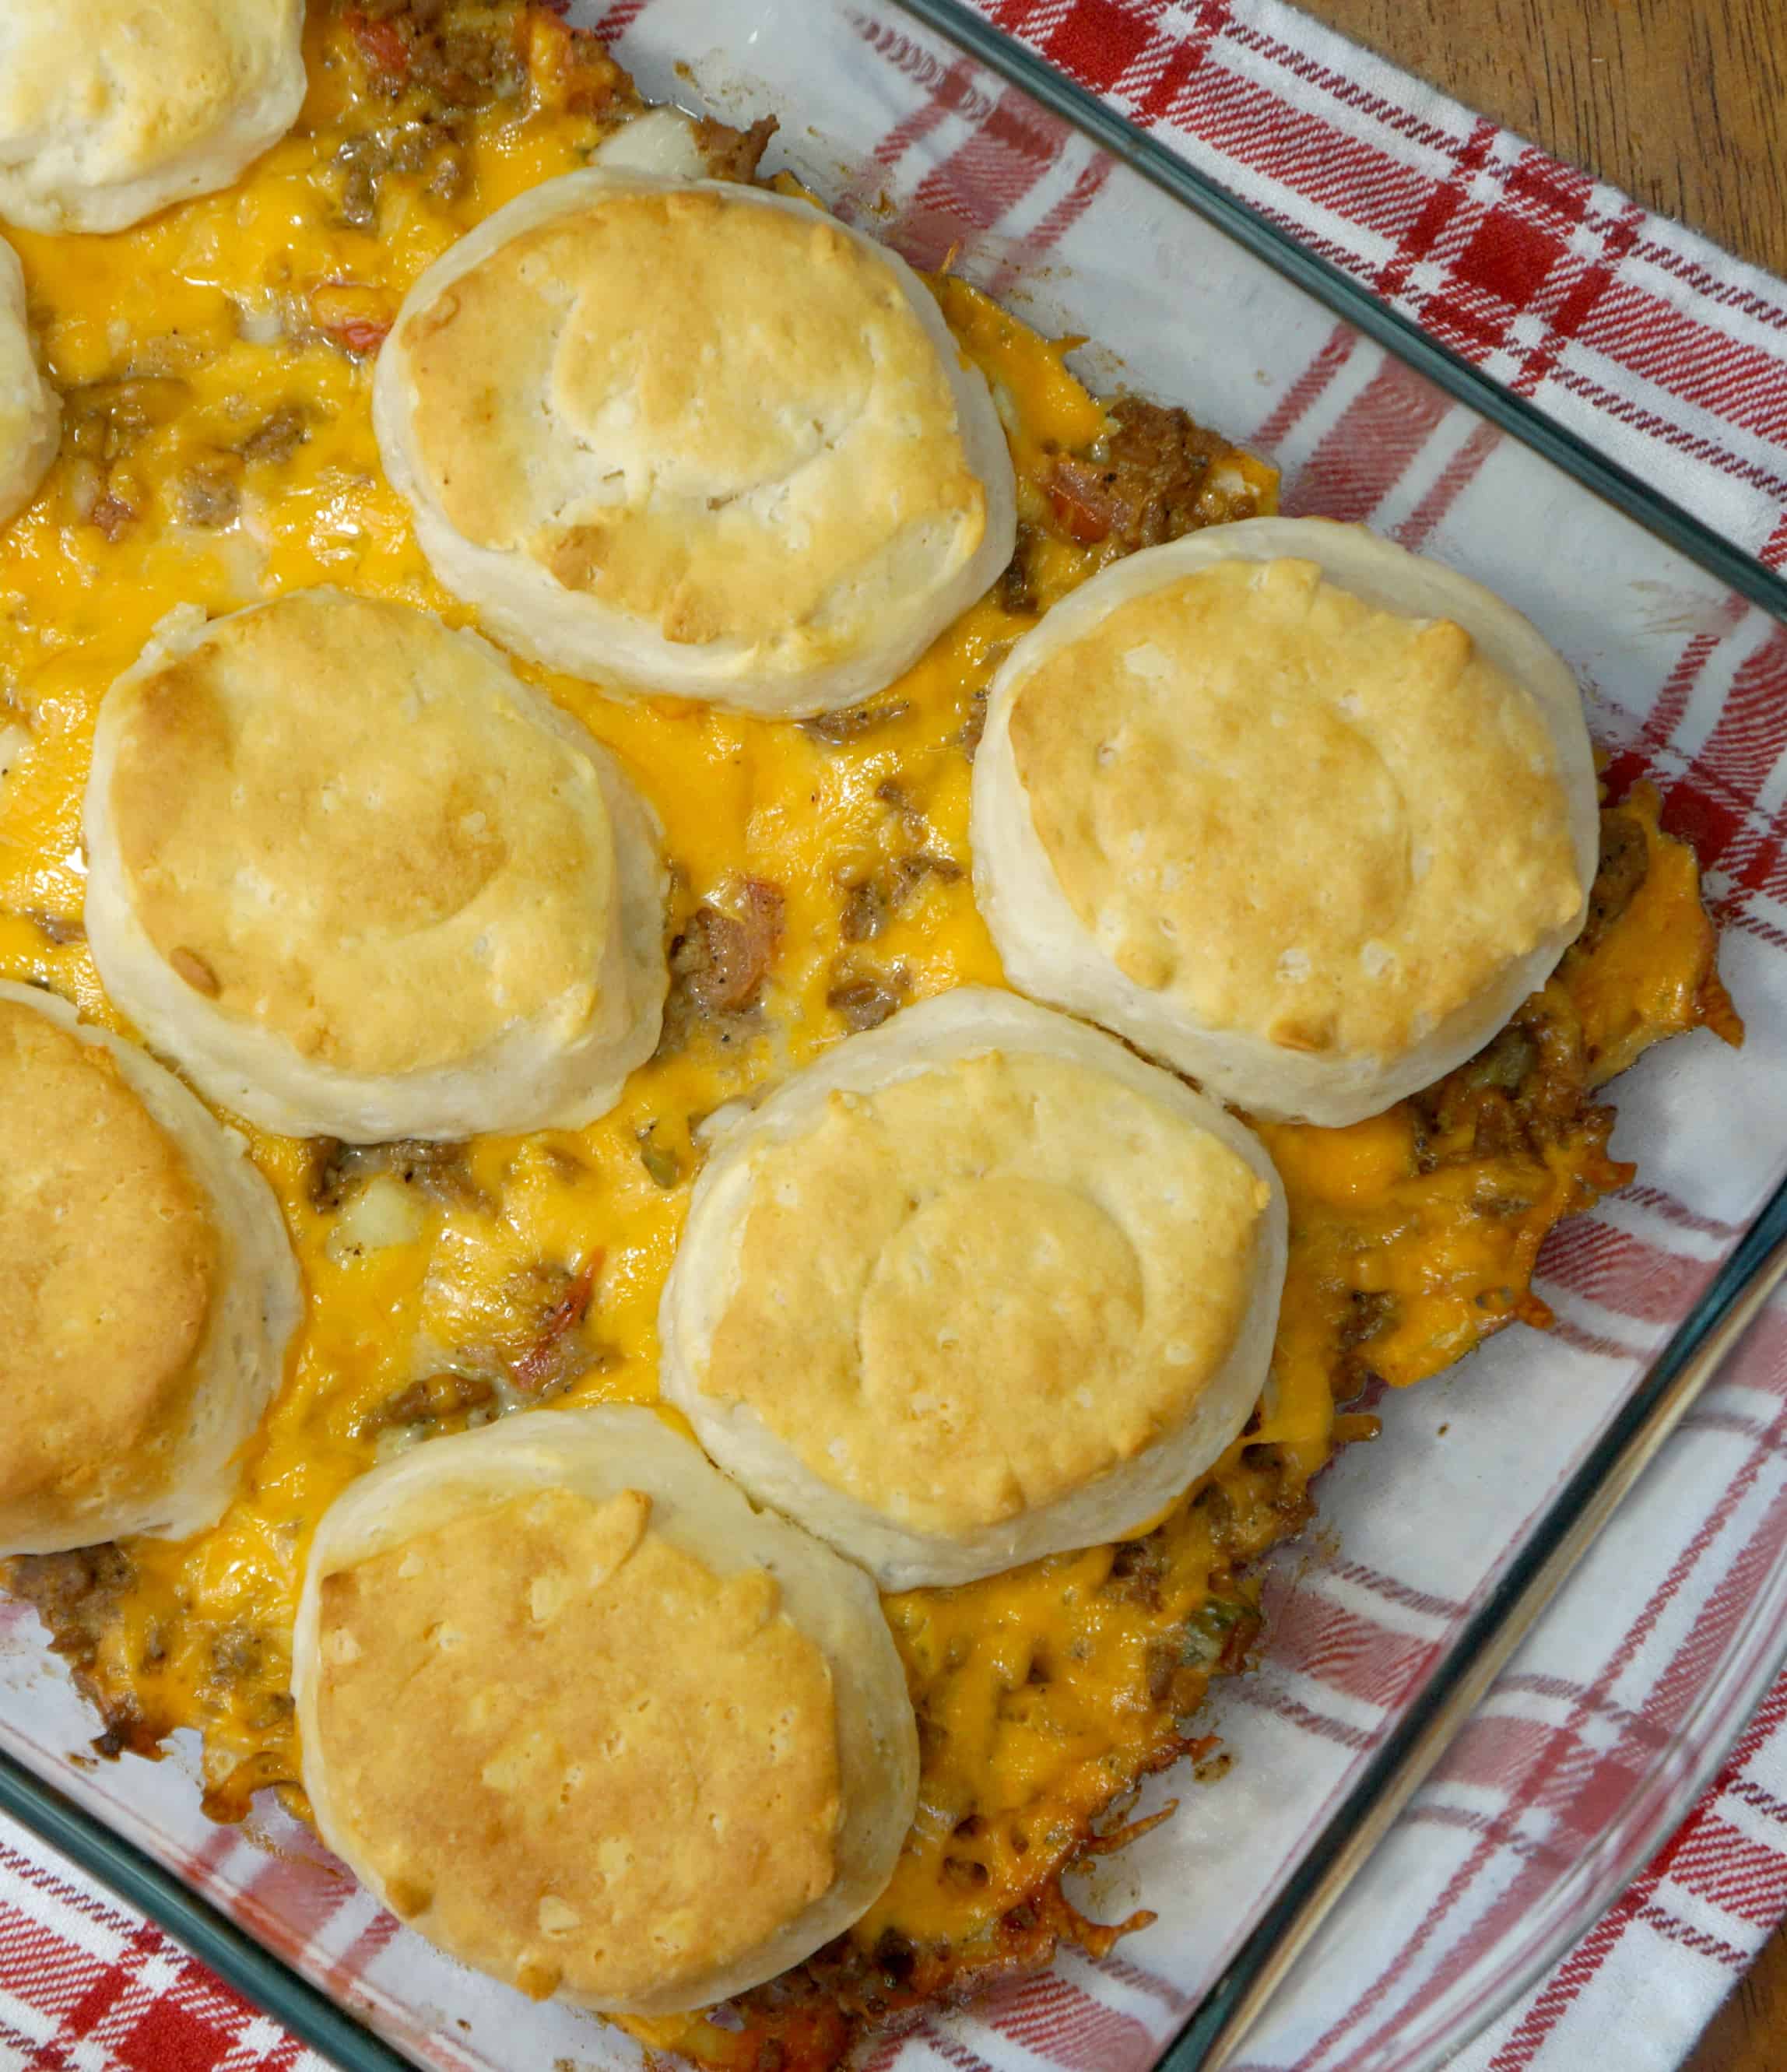 easy ground beef casserole loaded with cheese, onions, pickles, tomatoes, ketchup and mustard. Topped with Pillsbury biscuits.